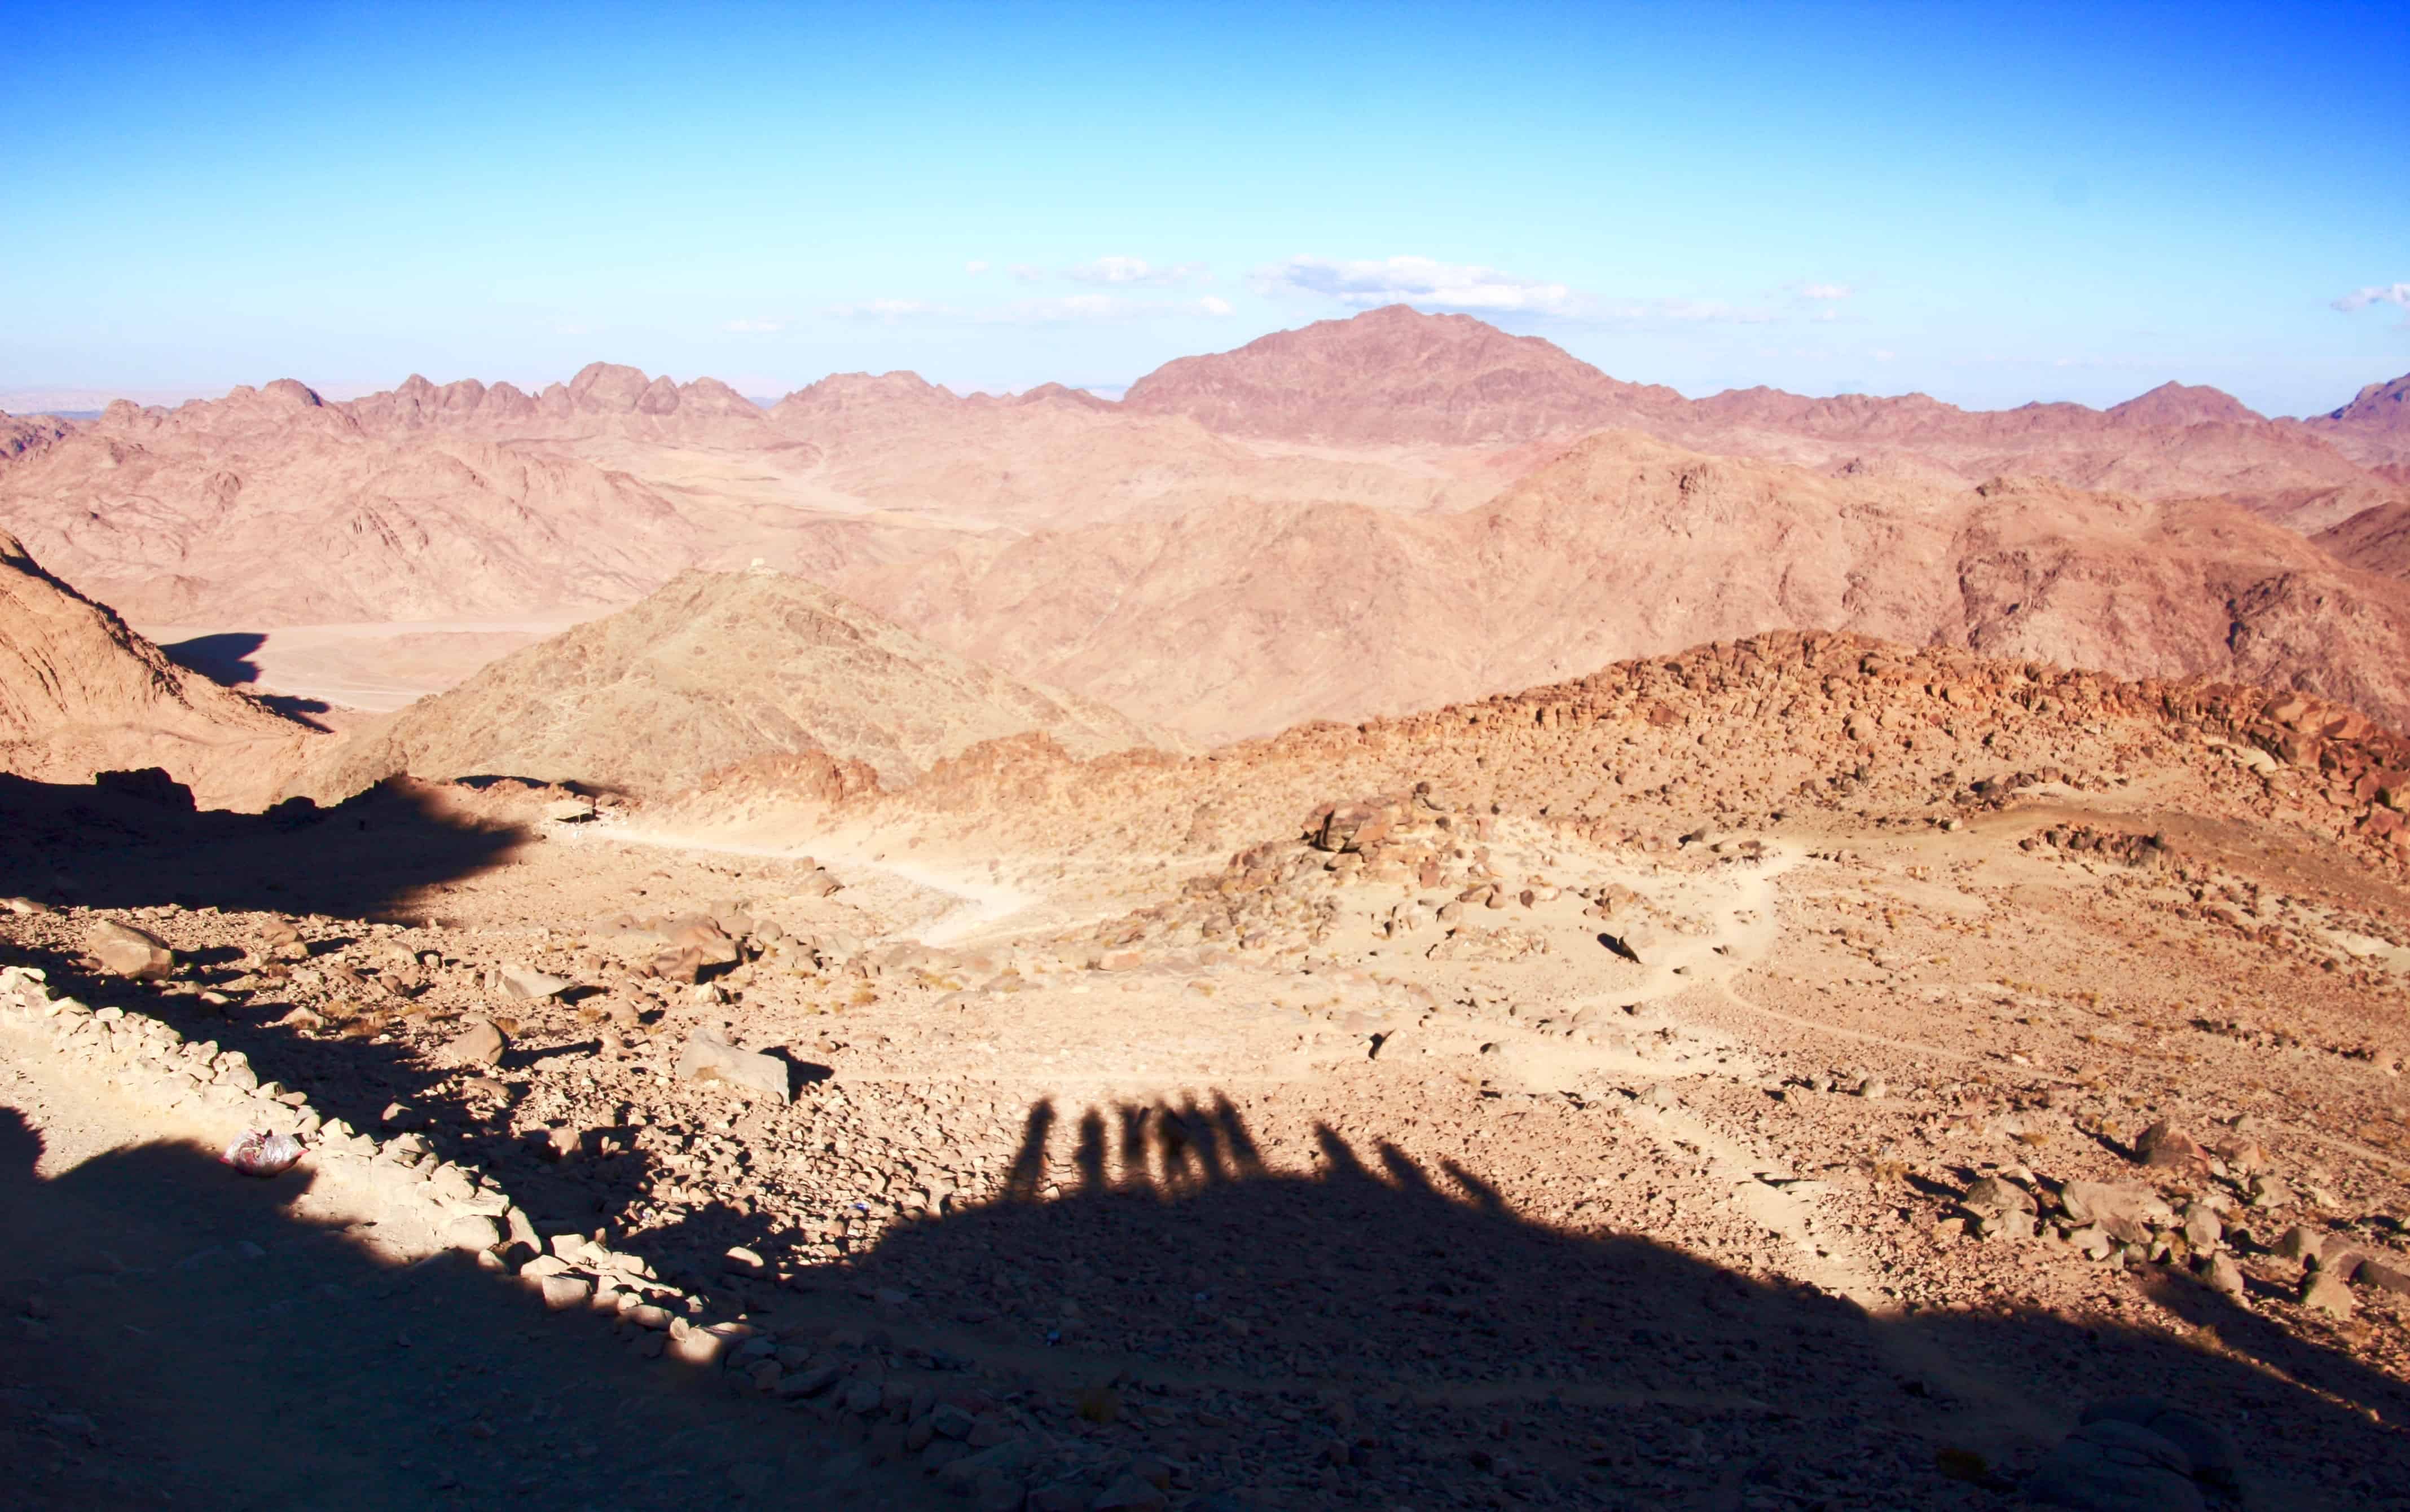 Silhouetted hikers on the trail up Mount Sinai, Egypt